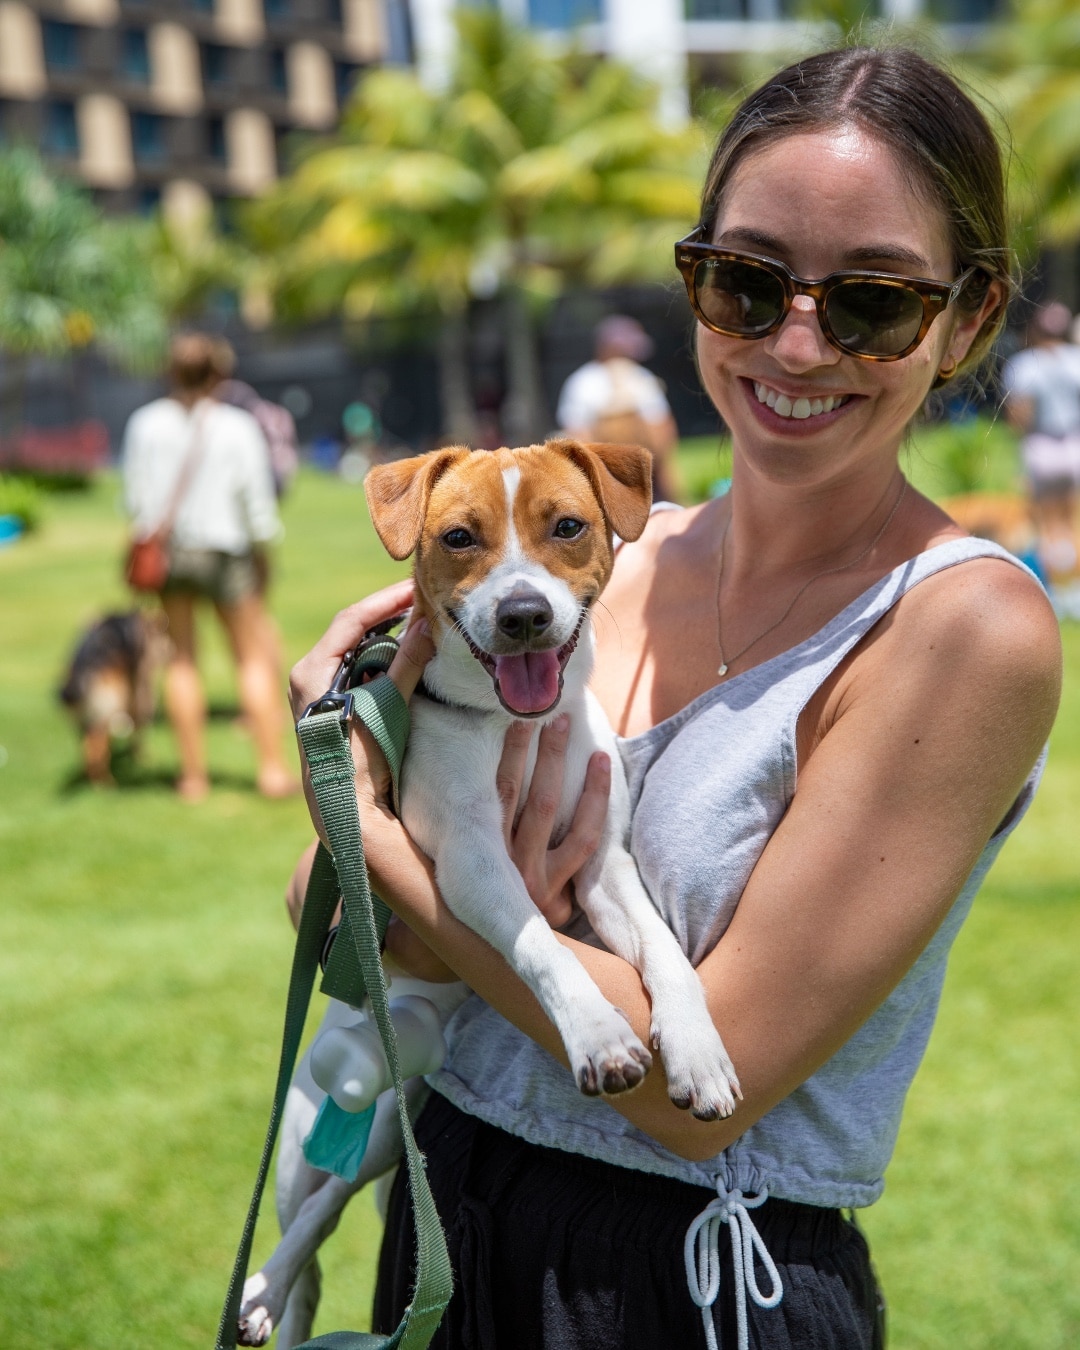 Happy National Pet Day! Bring your furry friends to Victoria Ward Park this Saturday, April 15 from 1pm – 4pm. Enjoy complimentary sweet treats for you and your pup from @sugarlinabakeshop (while supplies last), interactive toys, activities, and an obstacle course. Learn more in the link in our bio! #wardvillage #nationalpetday